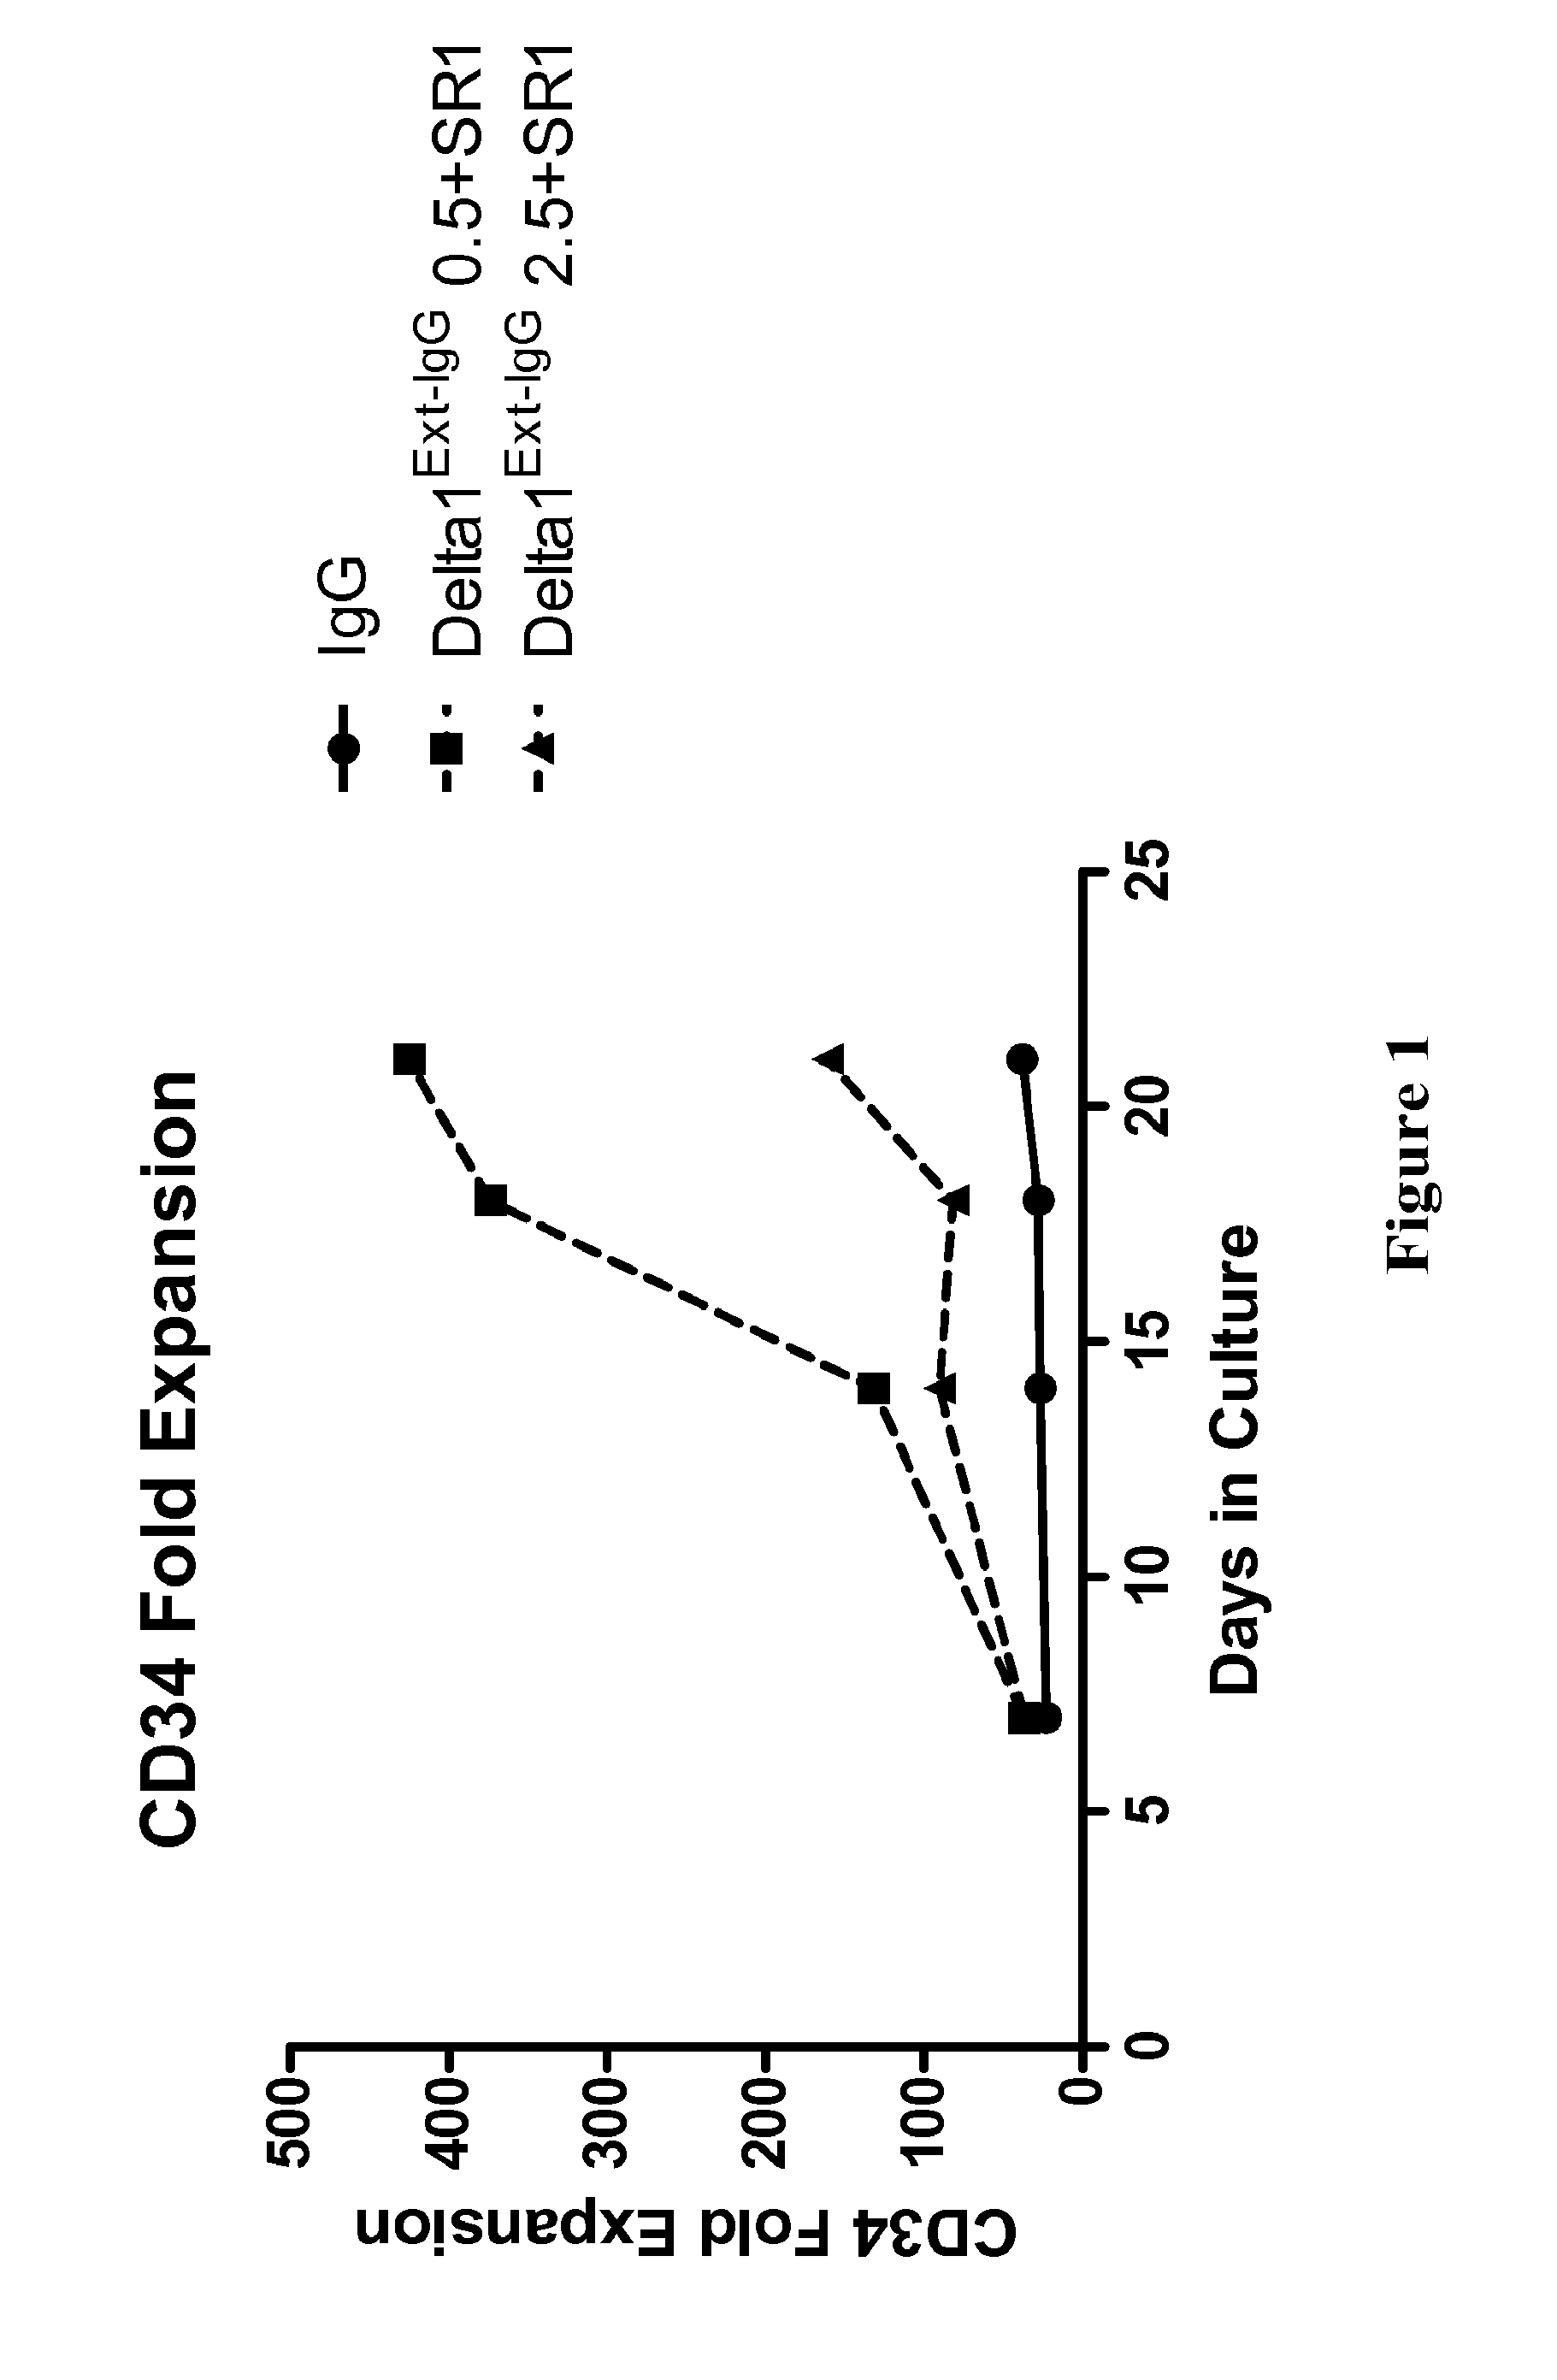 Compositions and methods for enhanced generation of hematopoietic stem/progenitor cells